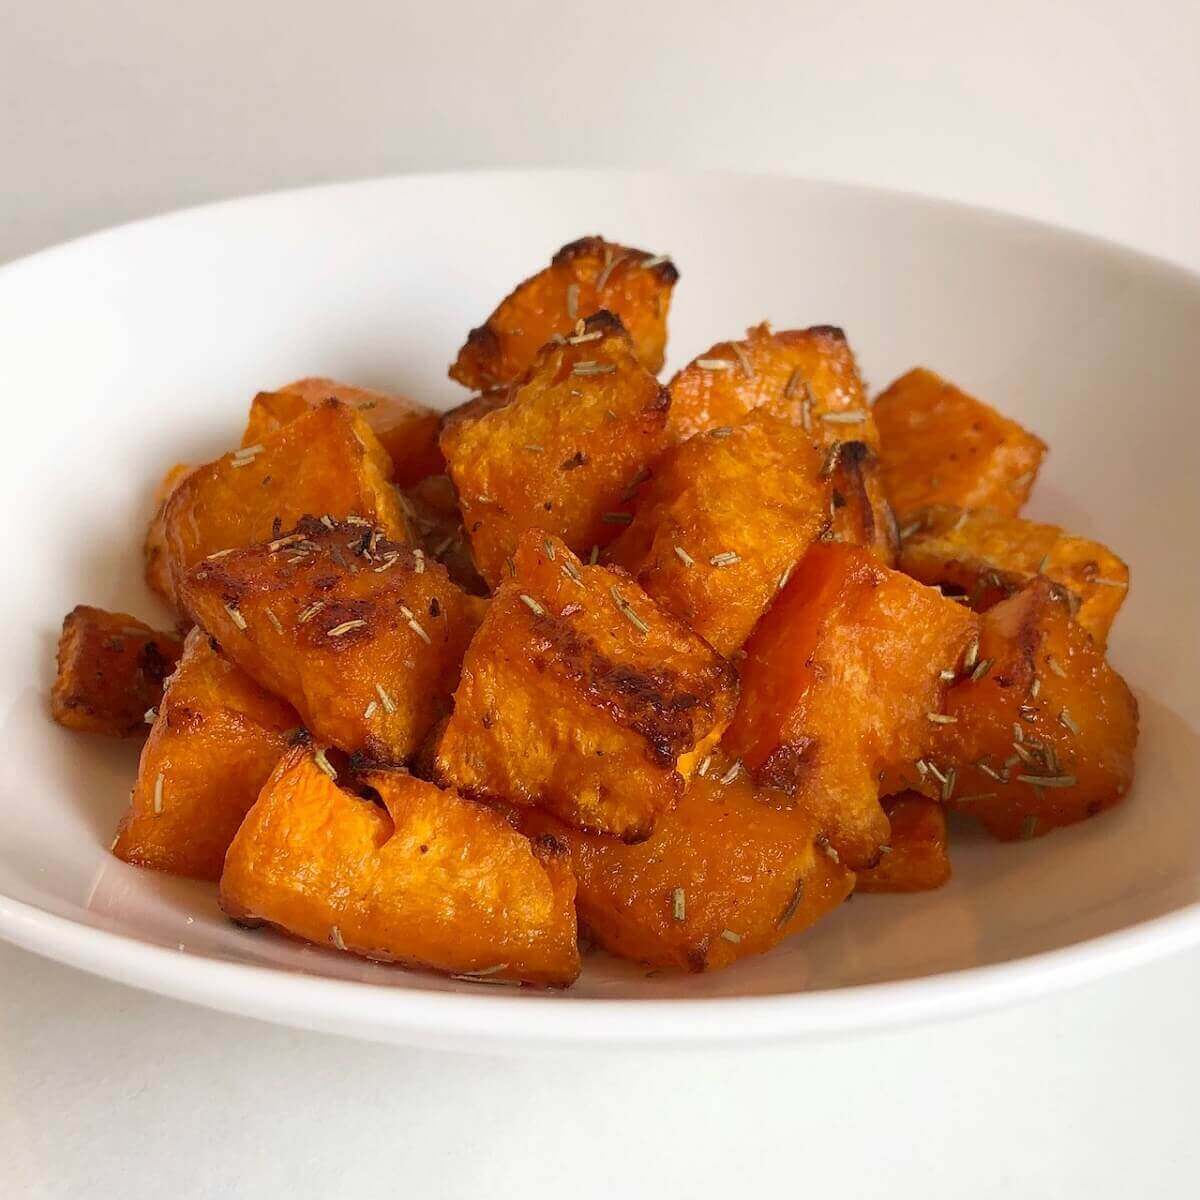 A bowl of roasted butternut squash with rosemary.